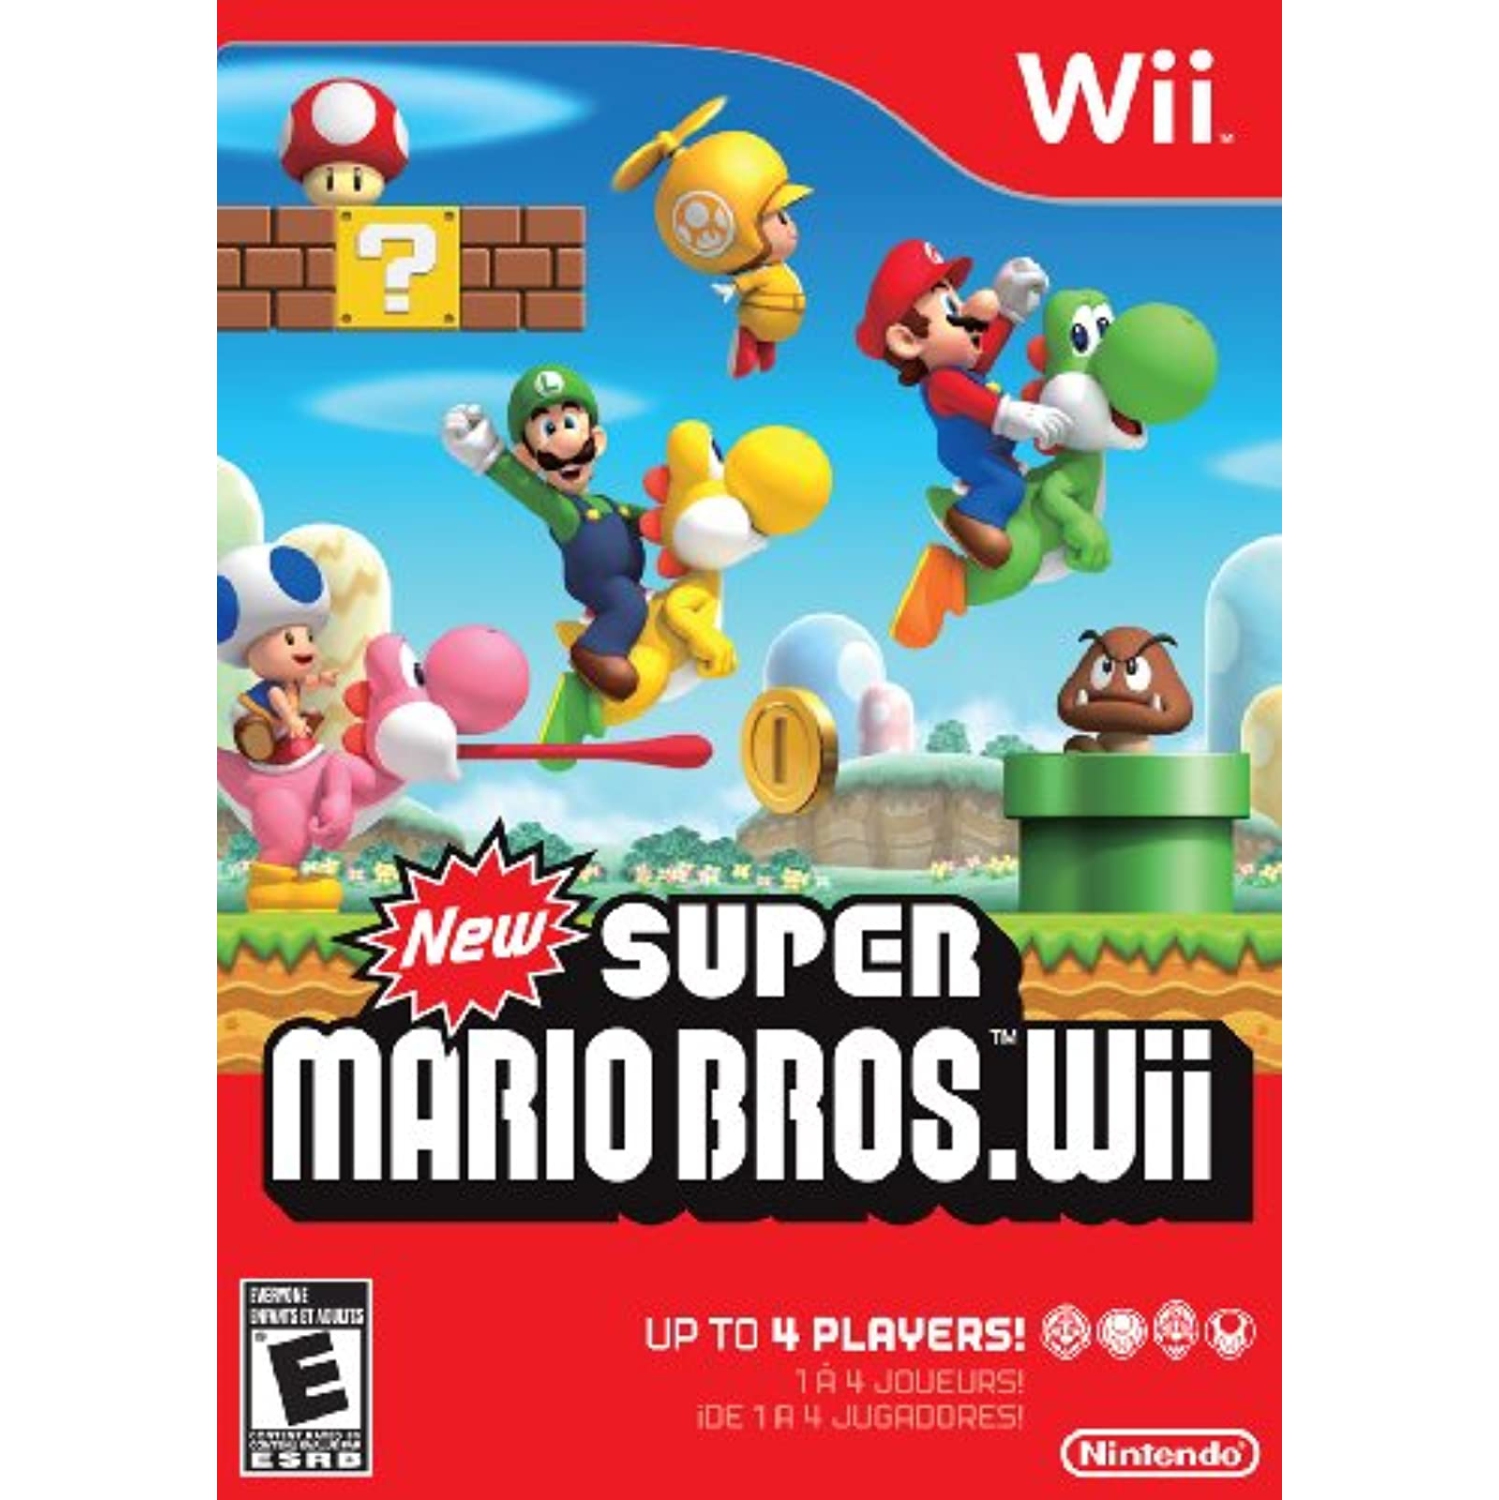 Best Buy: Nintendo Nintendo Wii Console (Red) with Wii Sports and New Super  Mario Bros. Wii Red RVLSRAAK